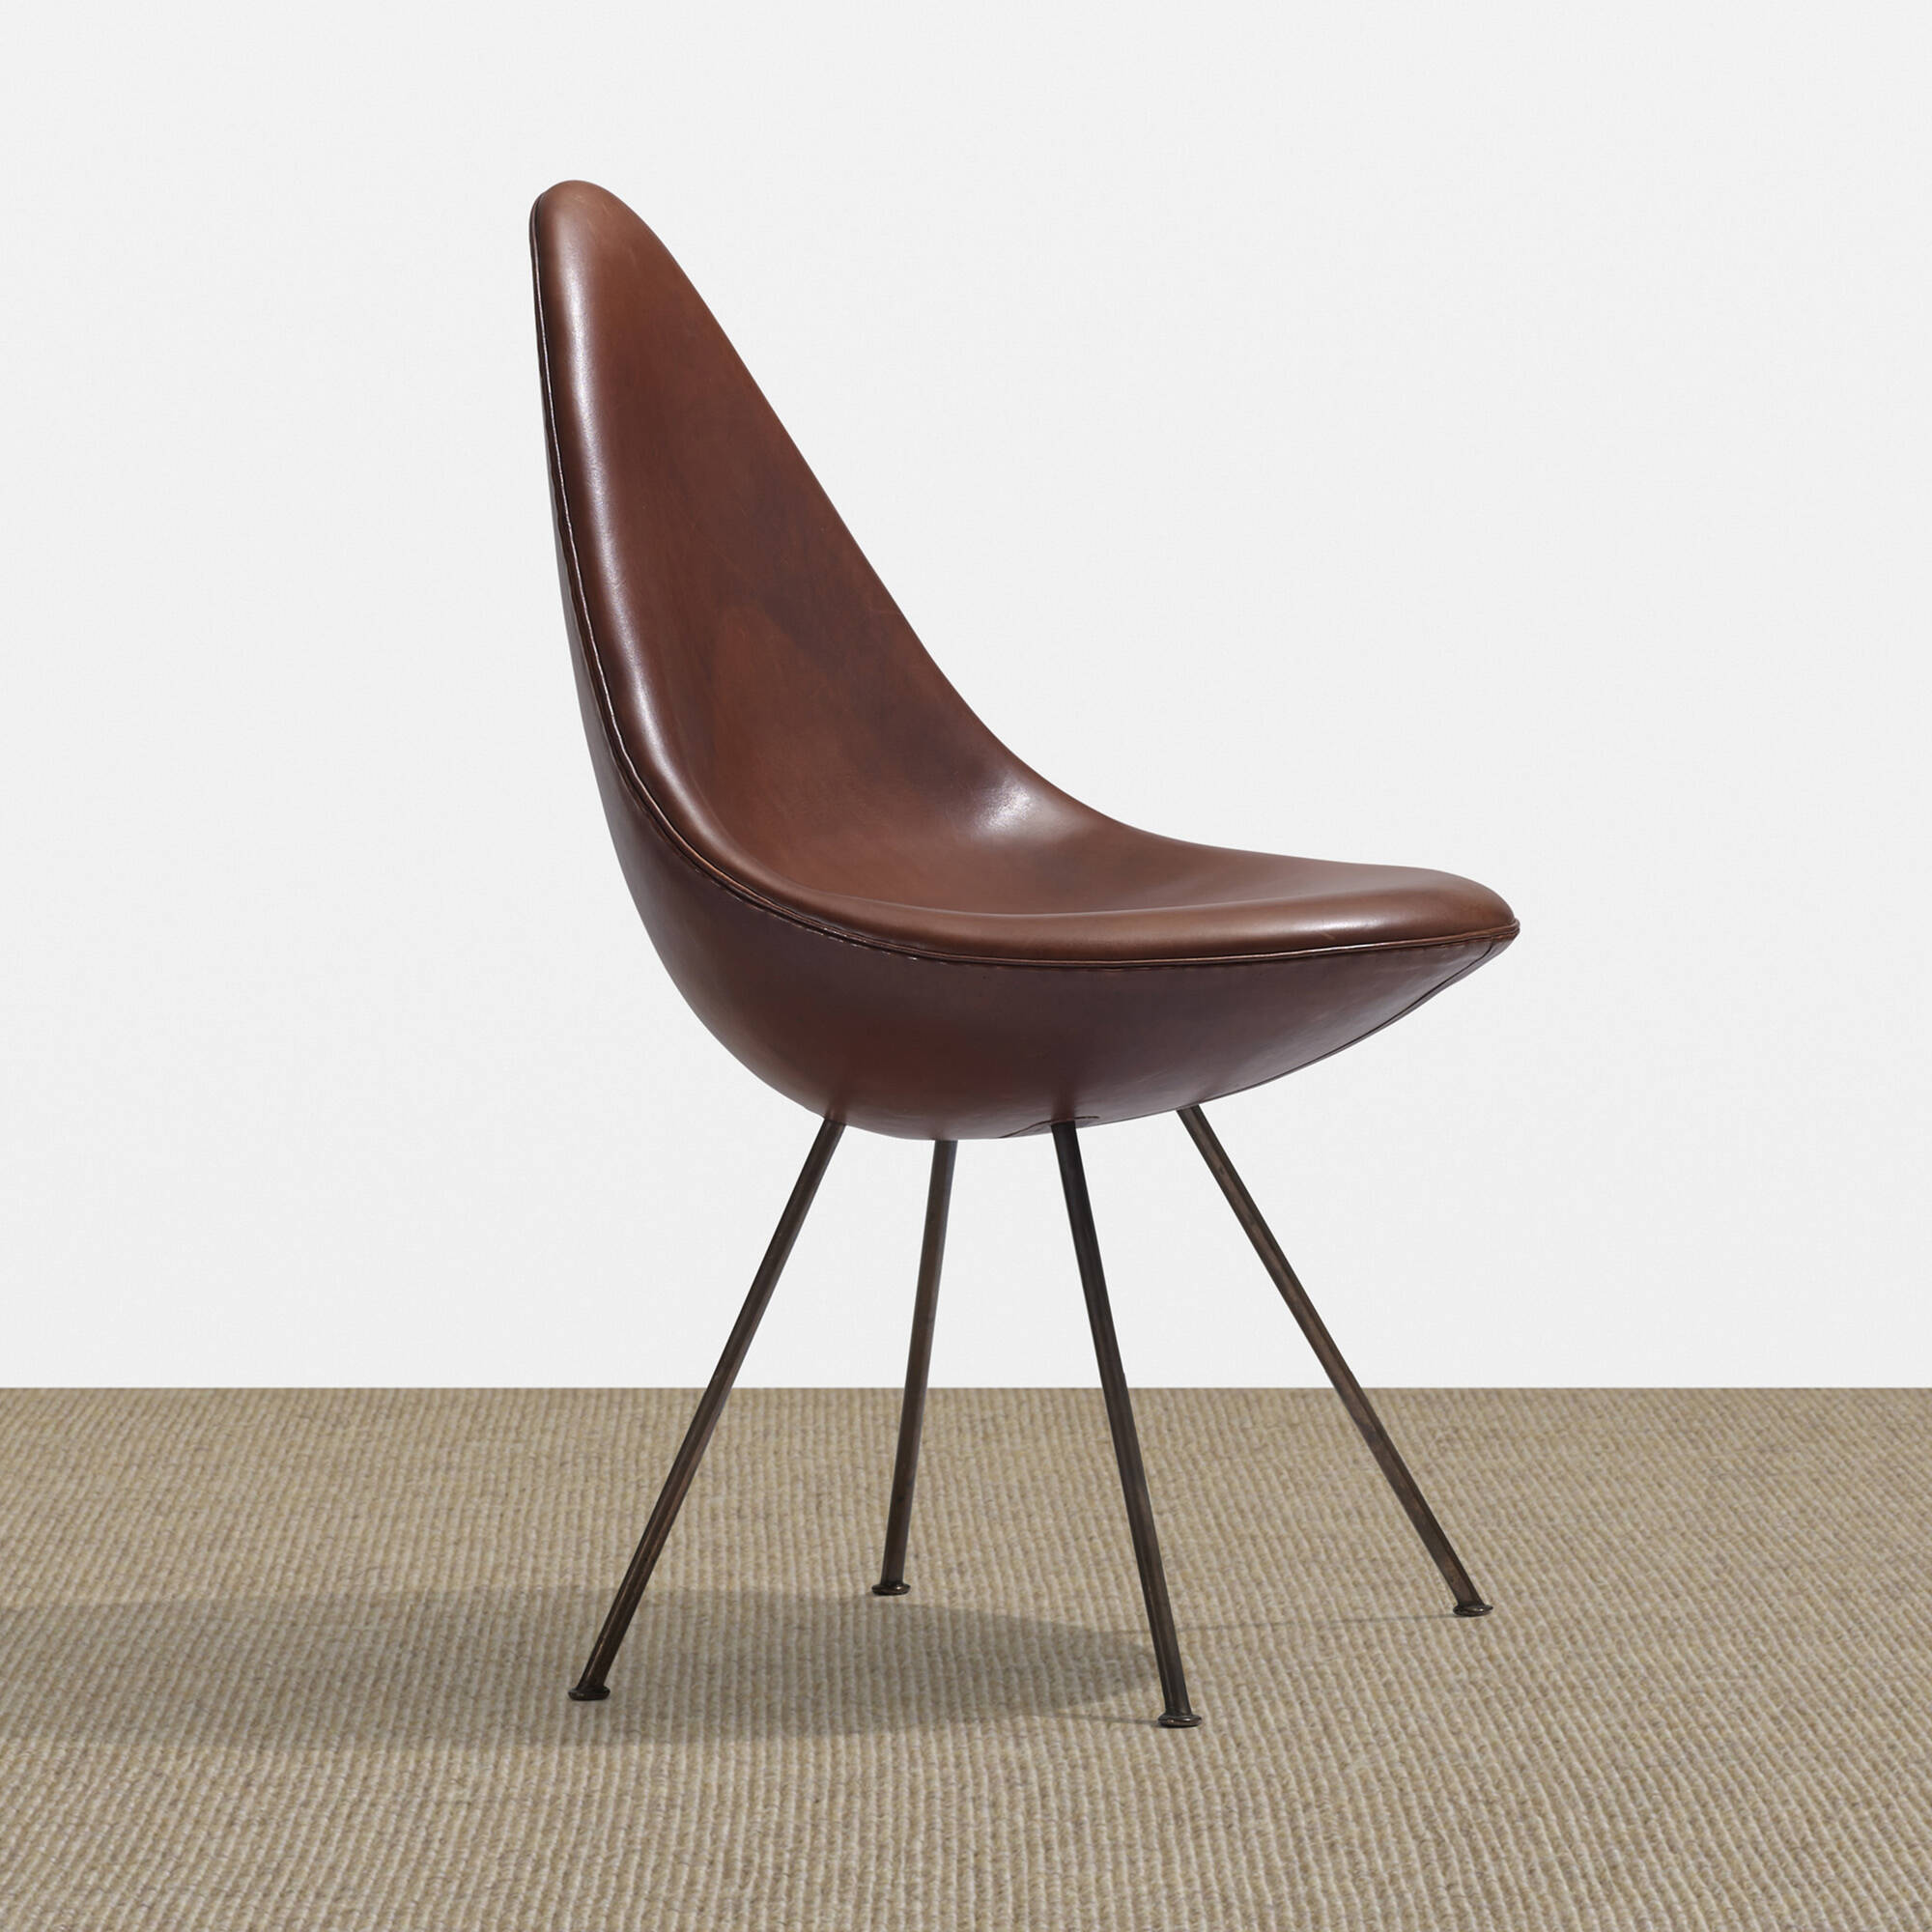 134 ARNE JACOBSEN, Drop chair from the SAS Royal Hotel